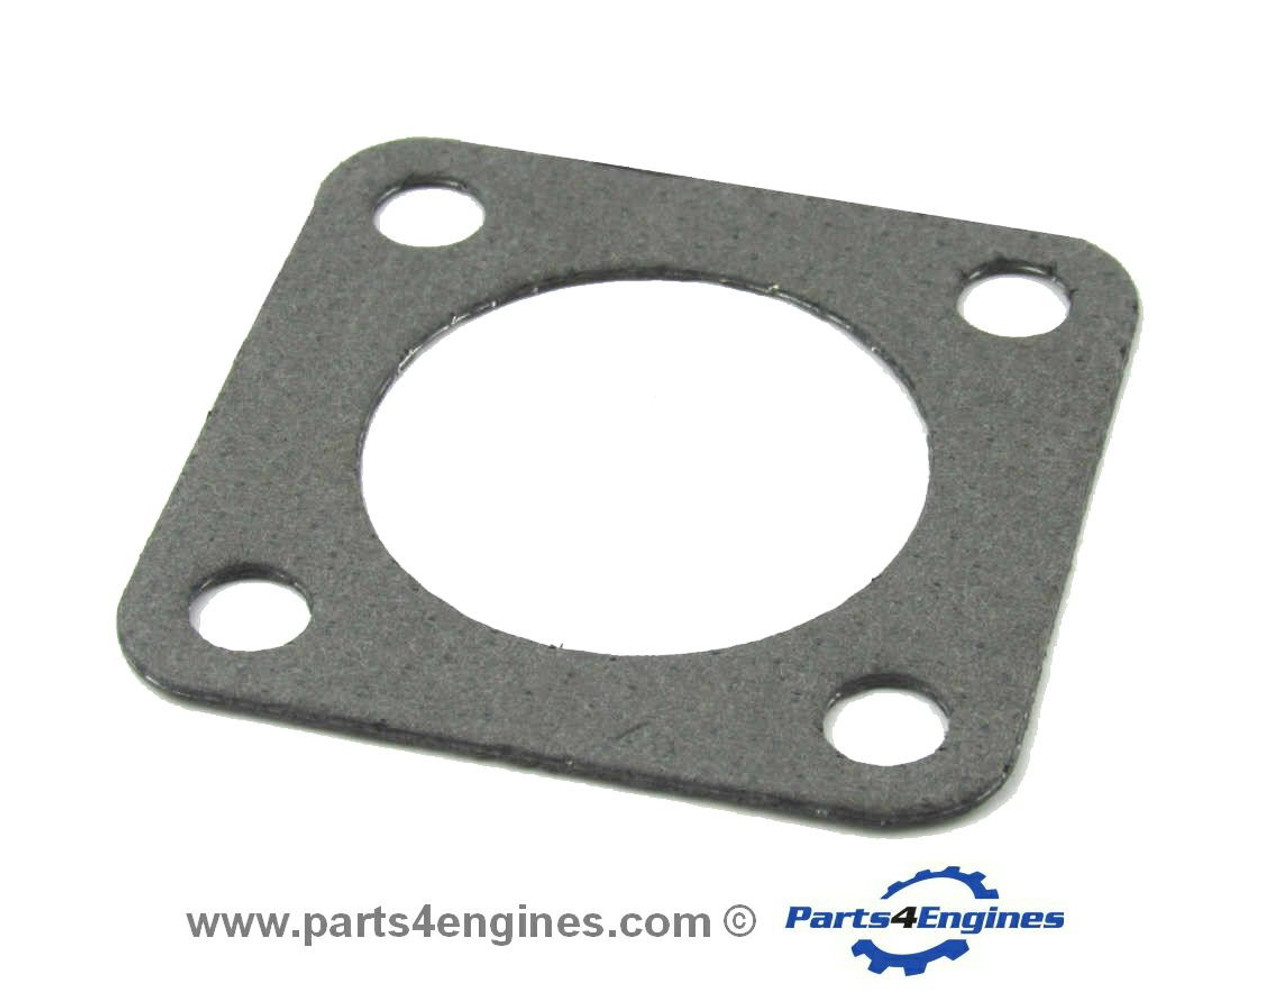 Volvo Penta MD2040 exhaust outlet gasket from parts4engines.com